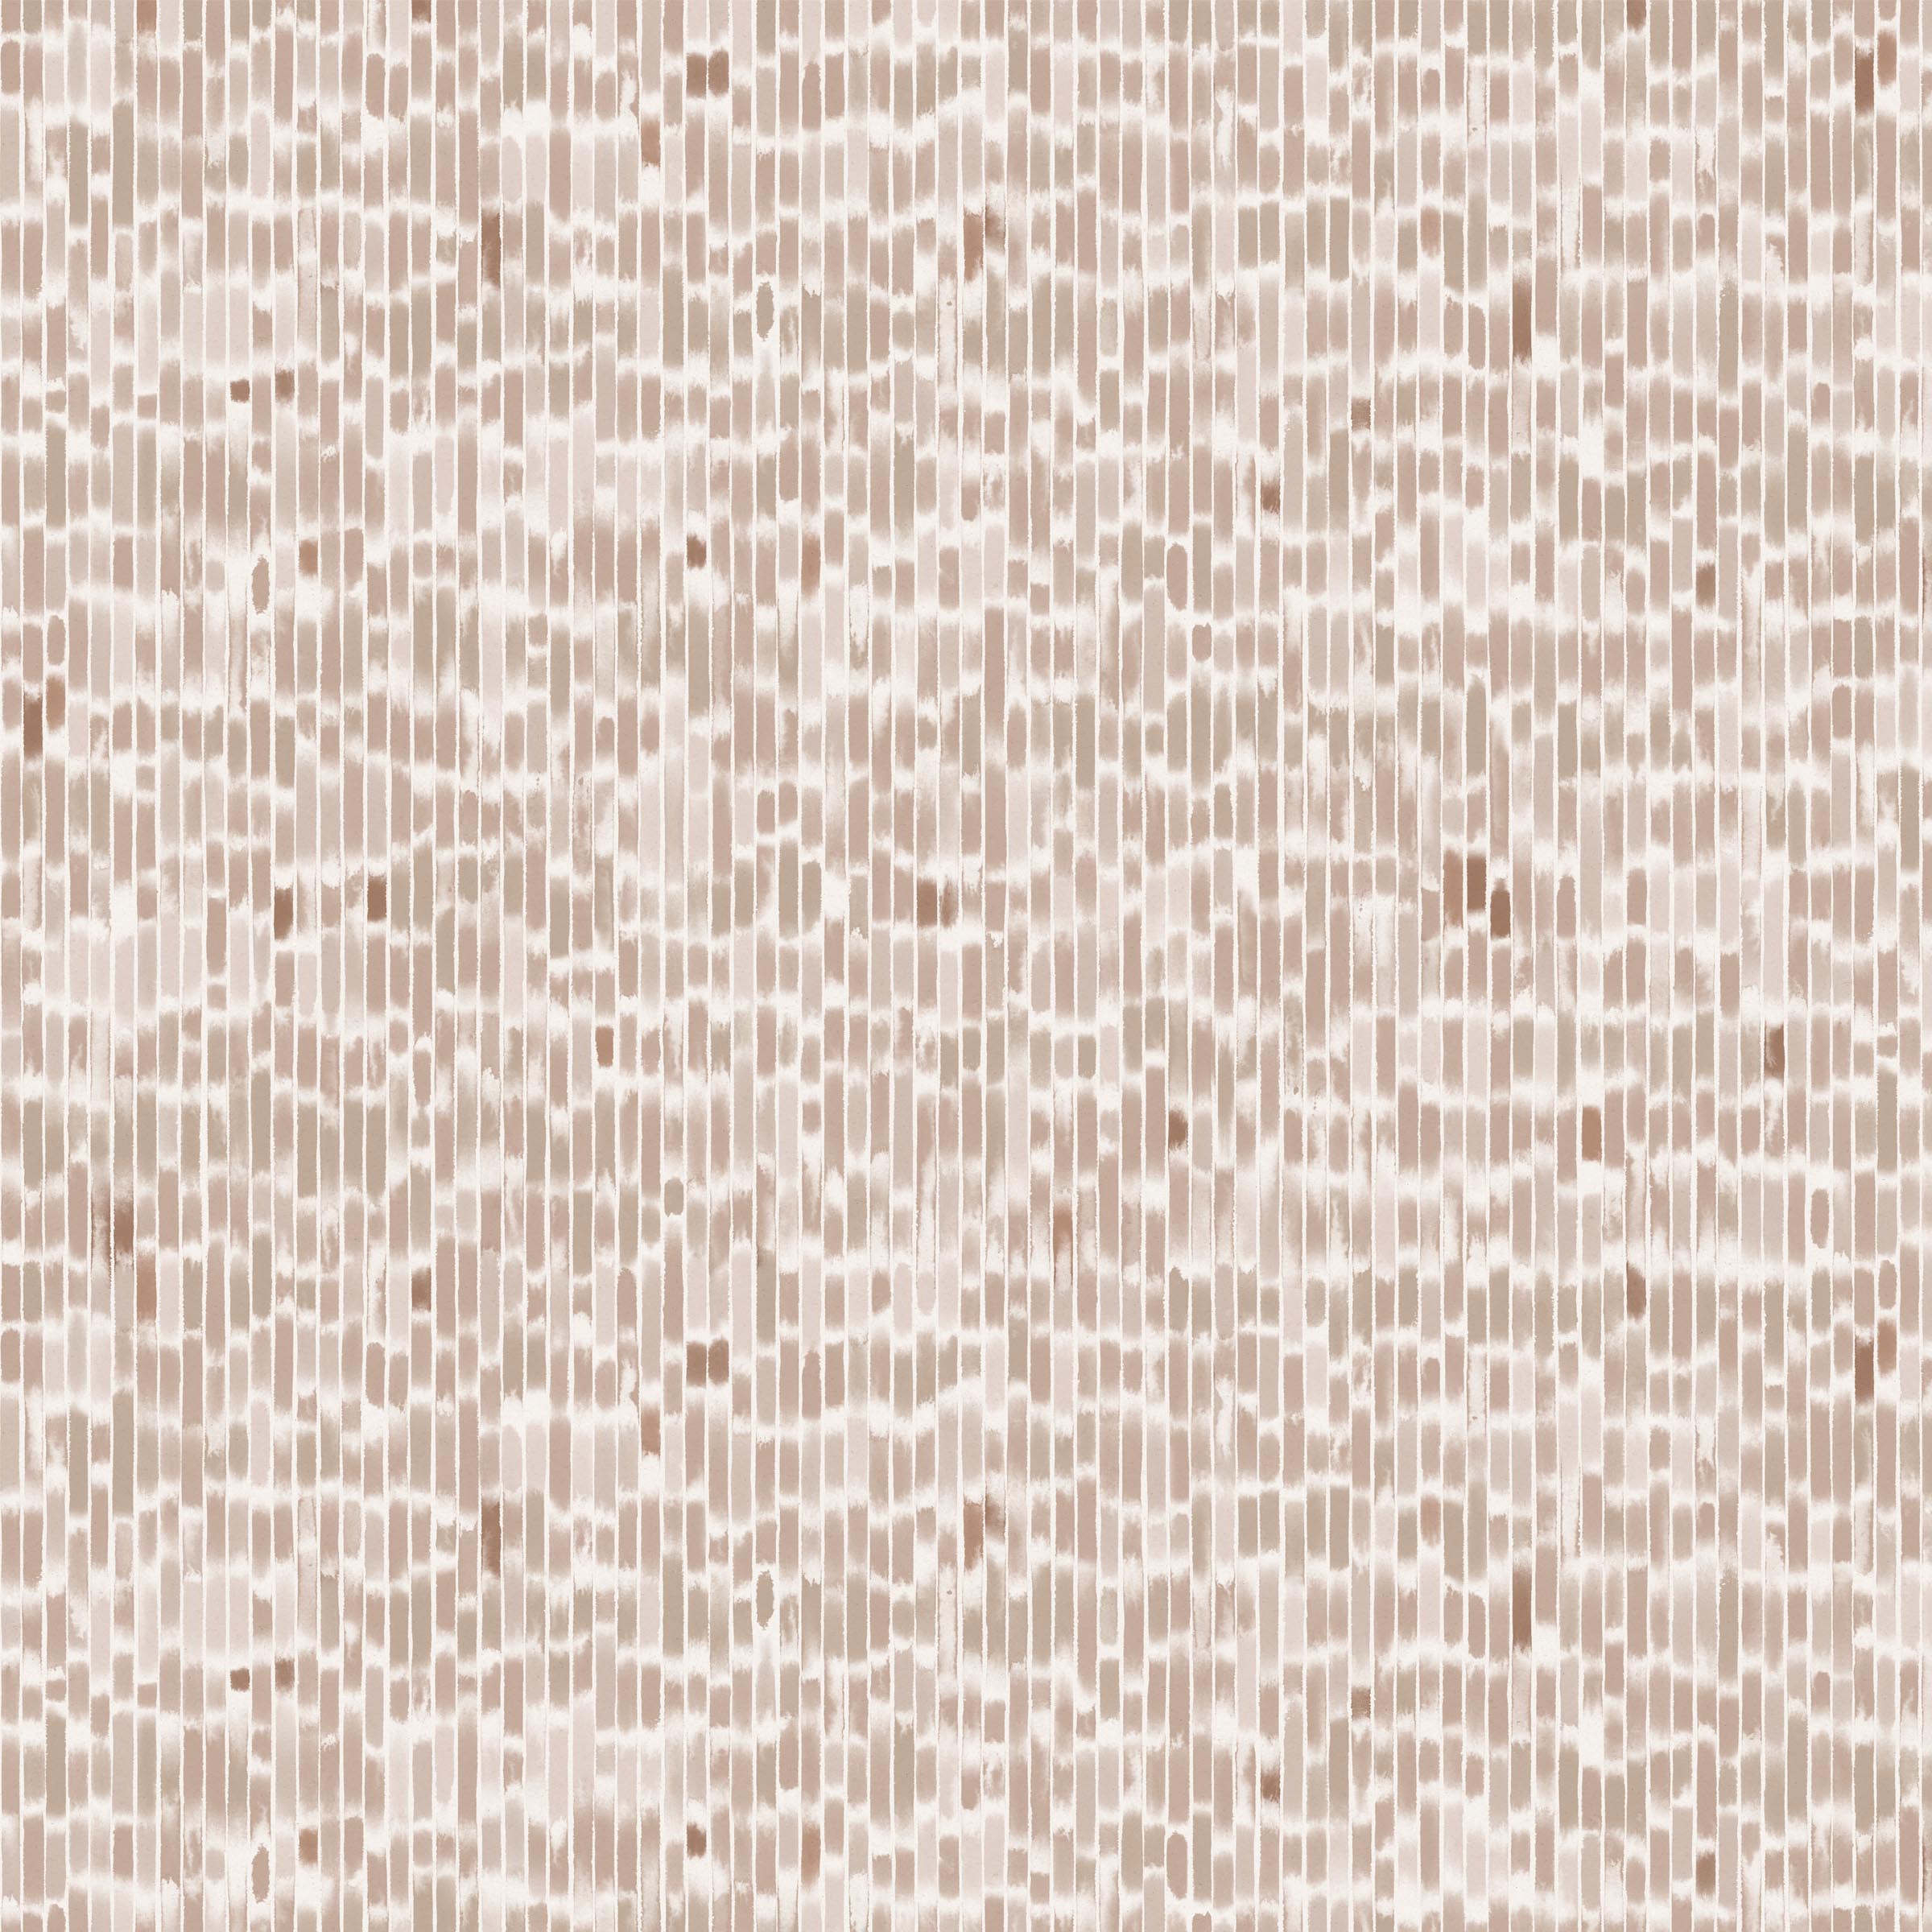 Detail of wallpaper in a linear check pattern in shades of brown on a cream field.